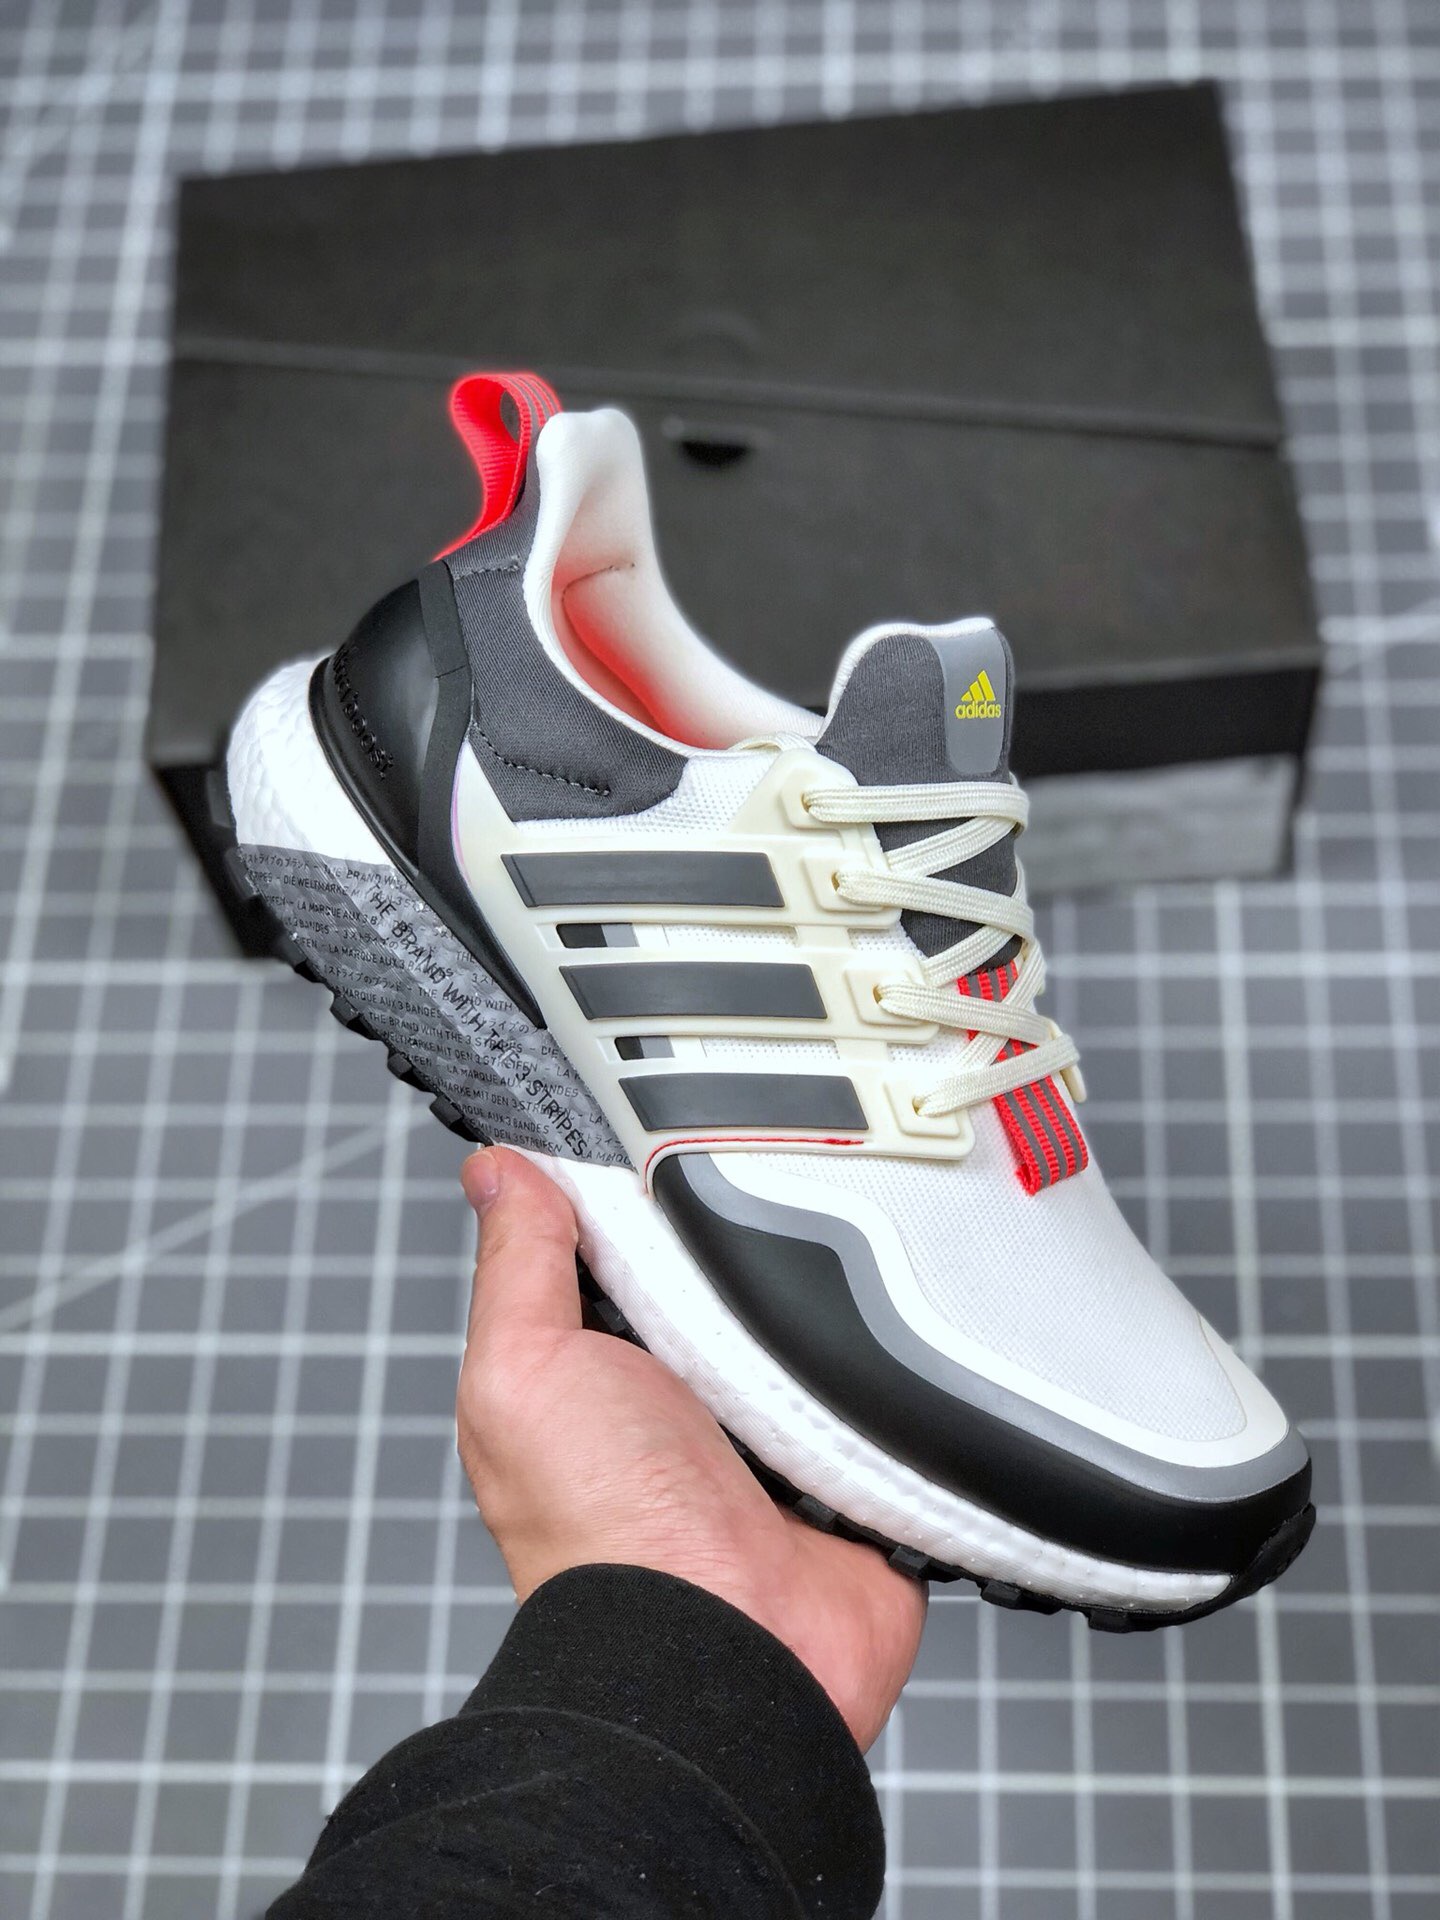 crime Misfortune Calamity Ultraboost All Terrain Off White on Sale, SAVE 41% - aveclumiere.com